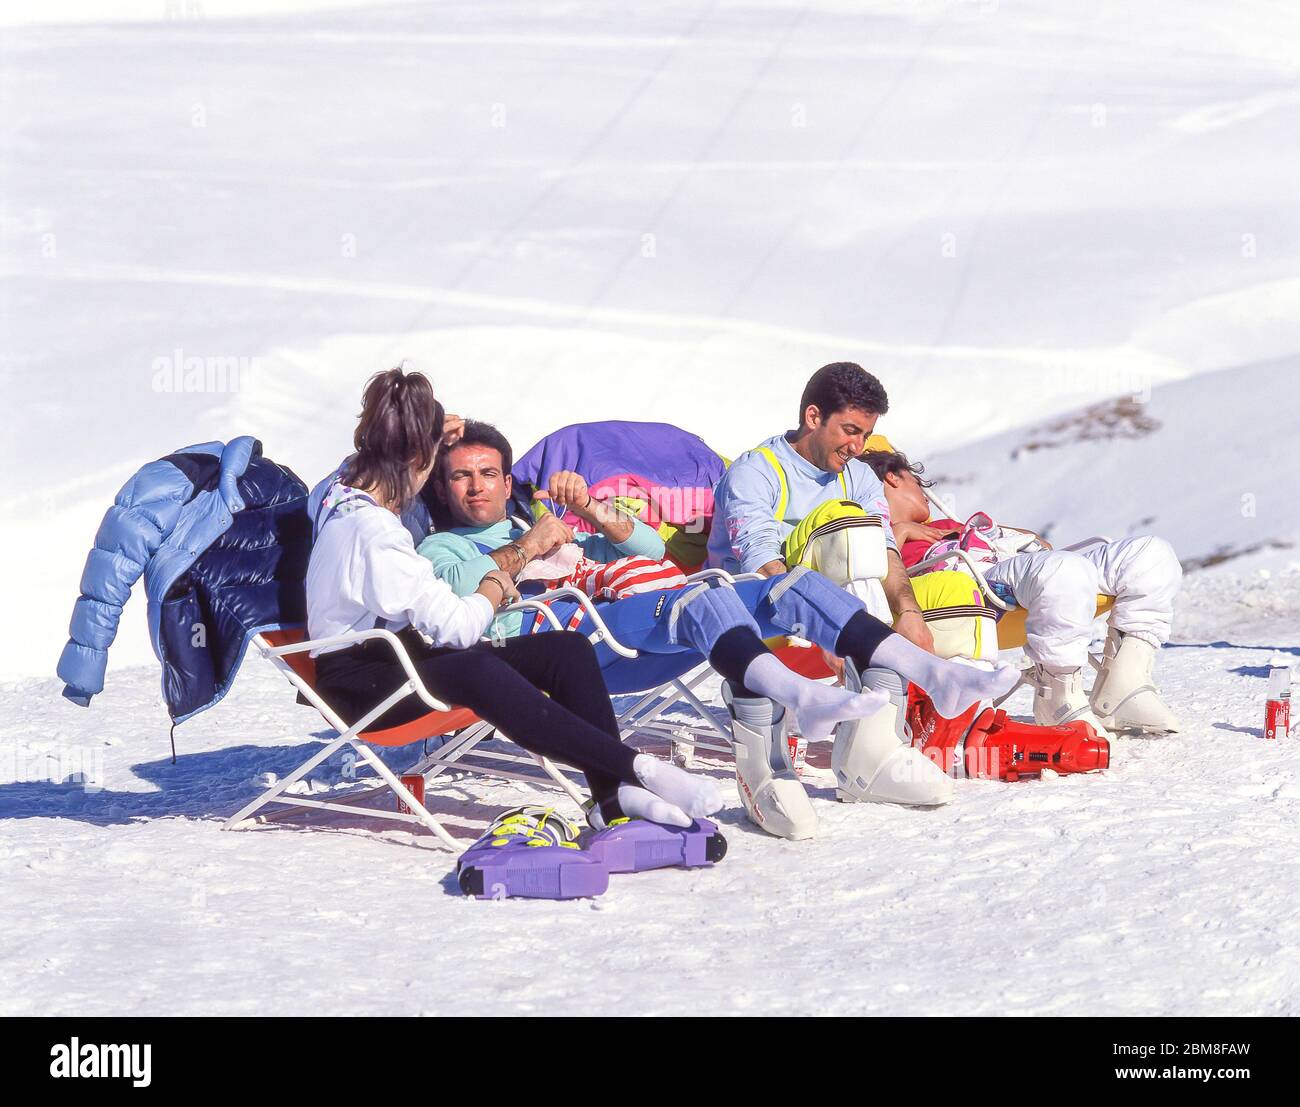 Skiers relaxing on piste, Breuil-Cervinia, Aosta Valley, Italy Stock Photo